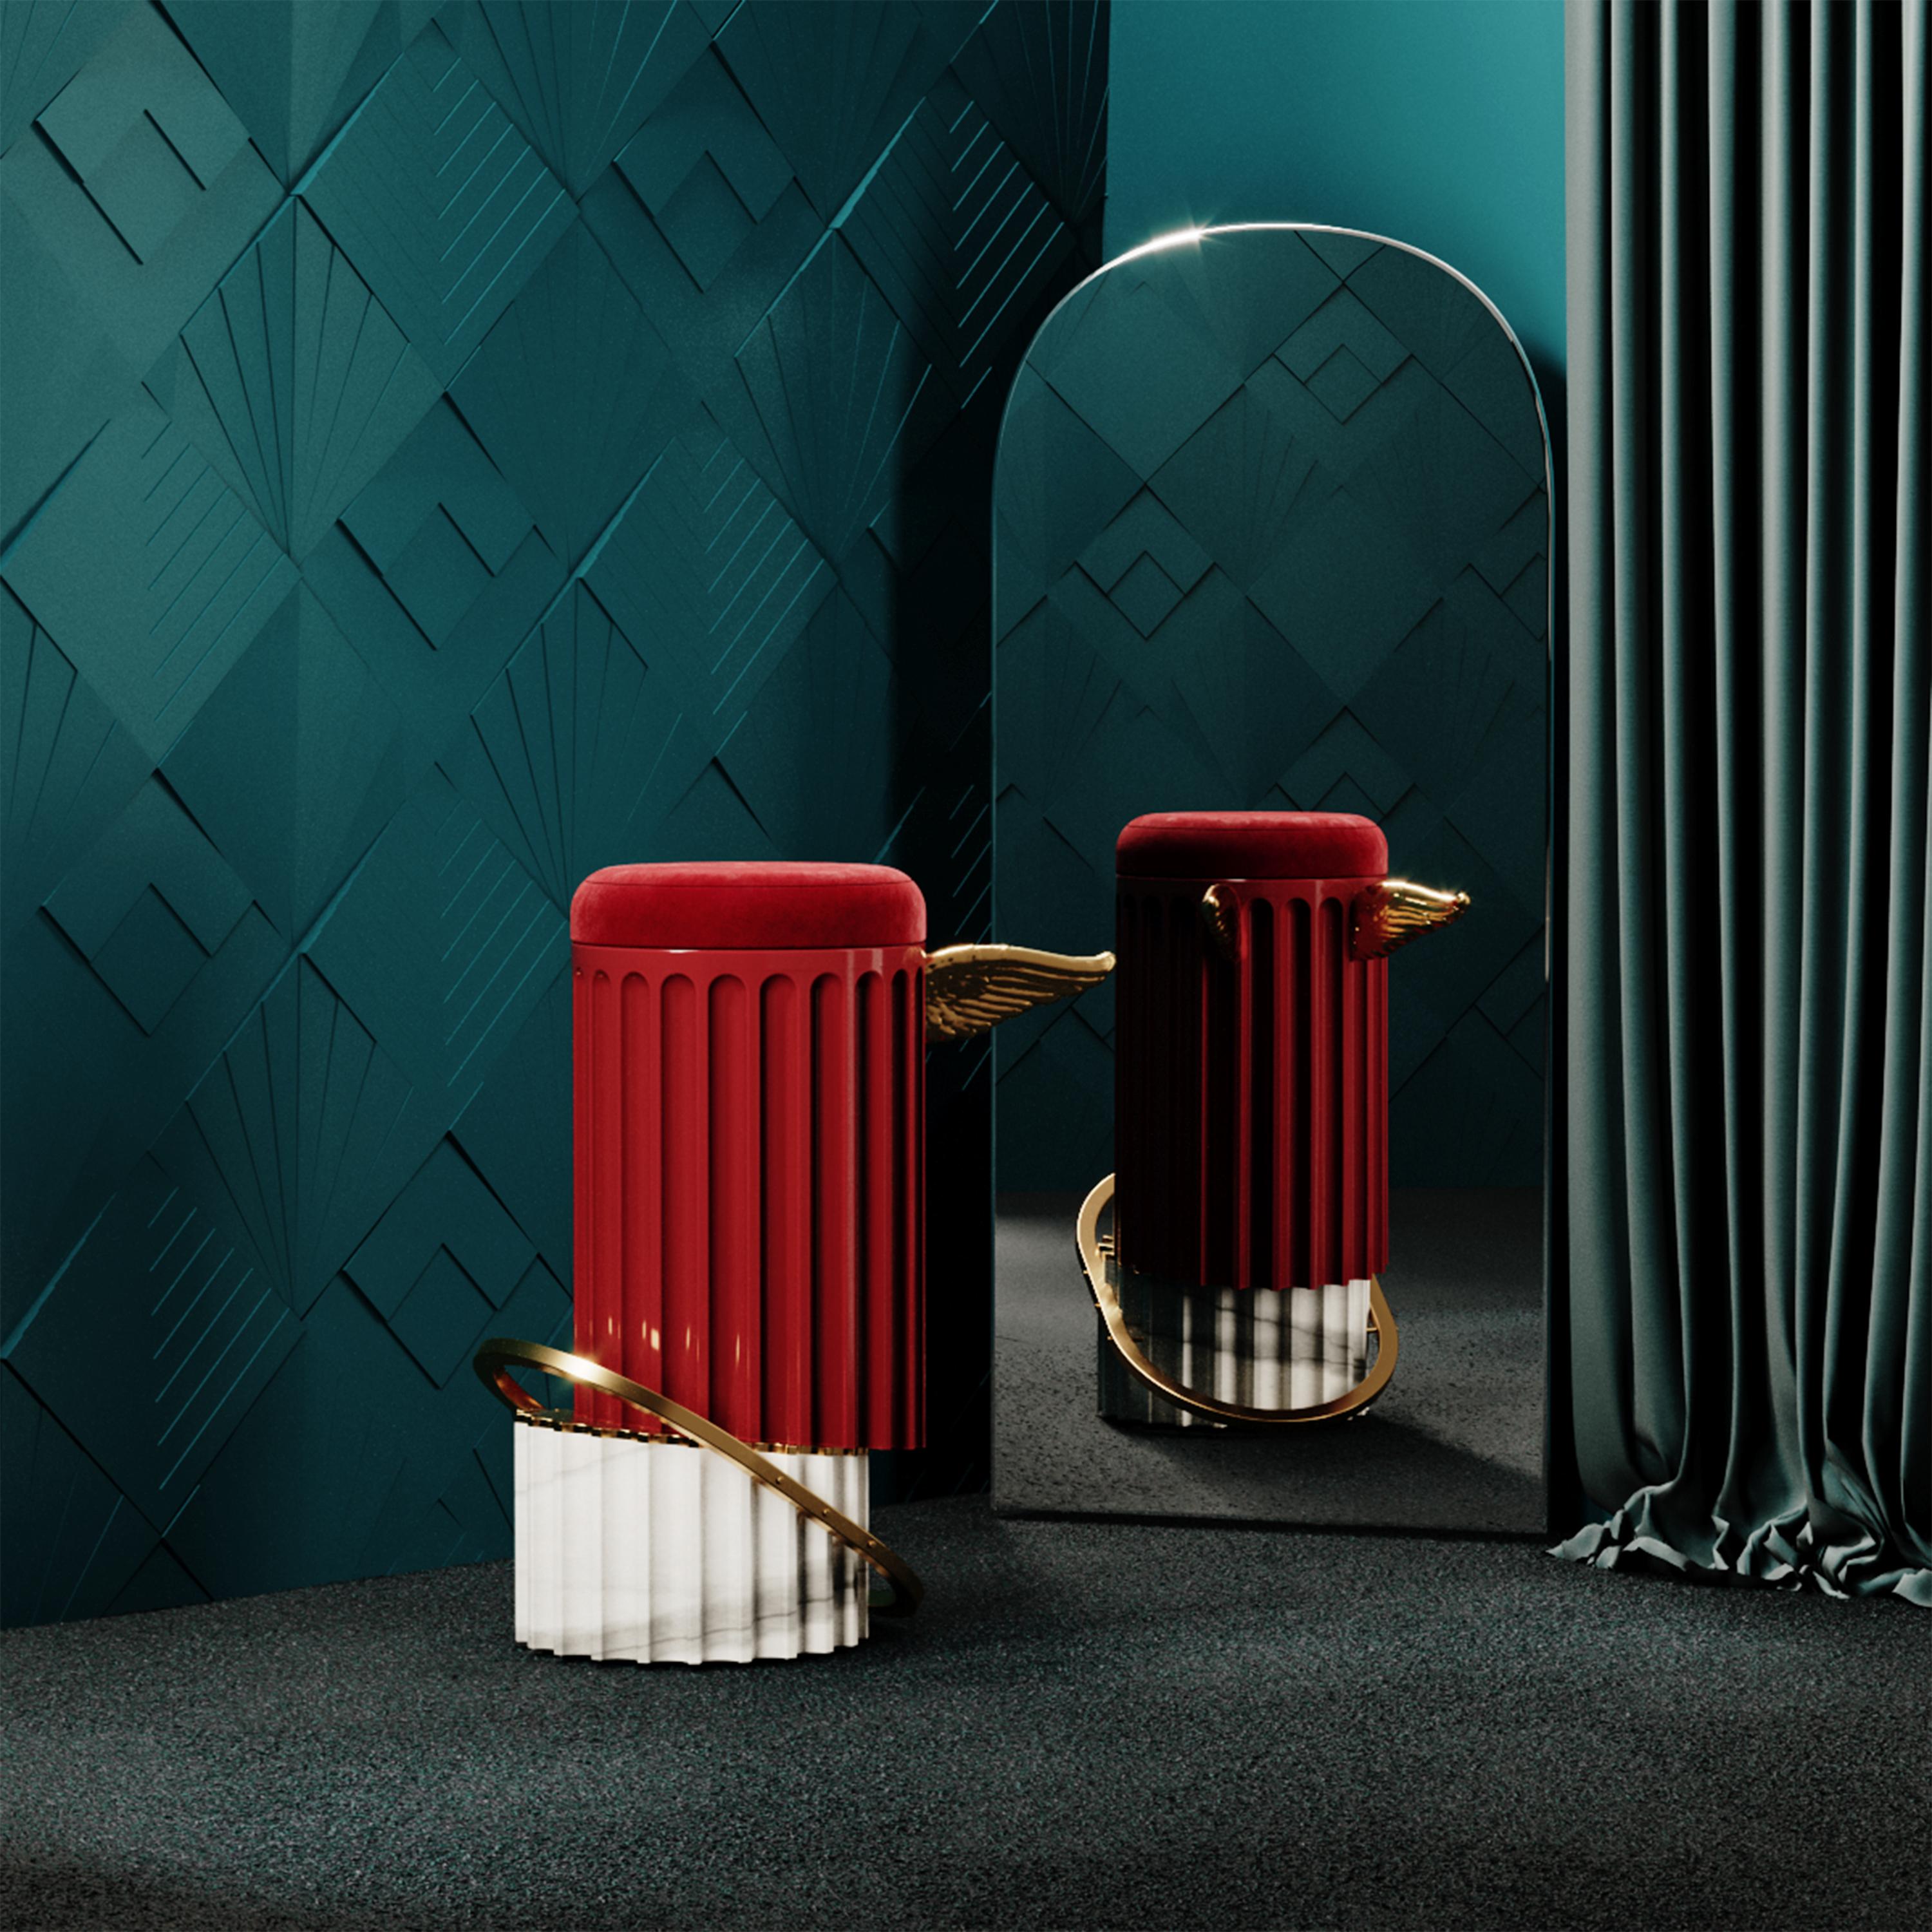 Through this controversial bar stool design, Malabar is delivering a message about itself: with an eye on the past yet with a twist of possibility and future, Malabar designers were bold enough to project an artsy bar stool with a flair of Roman